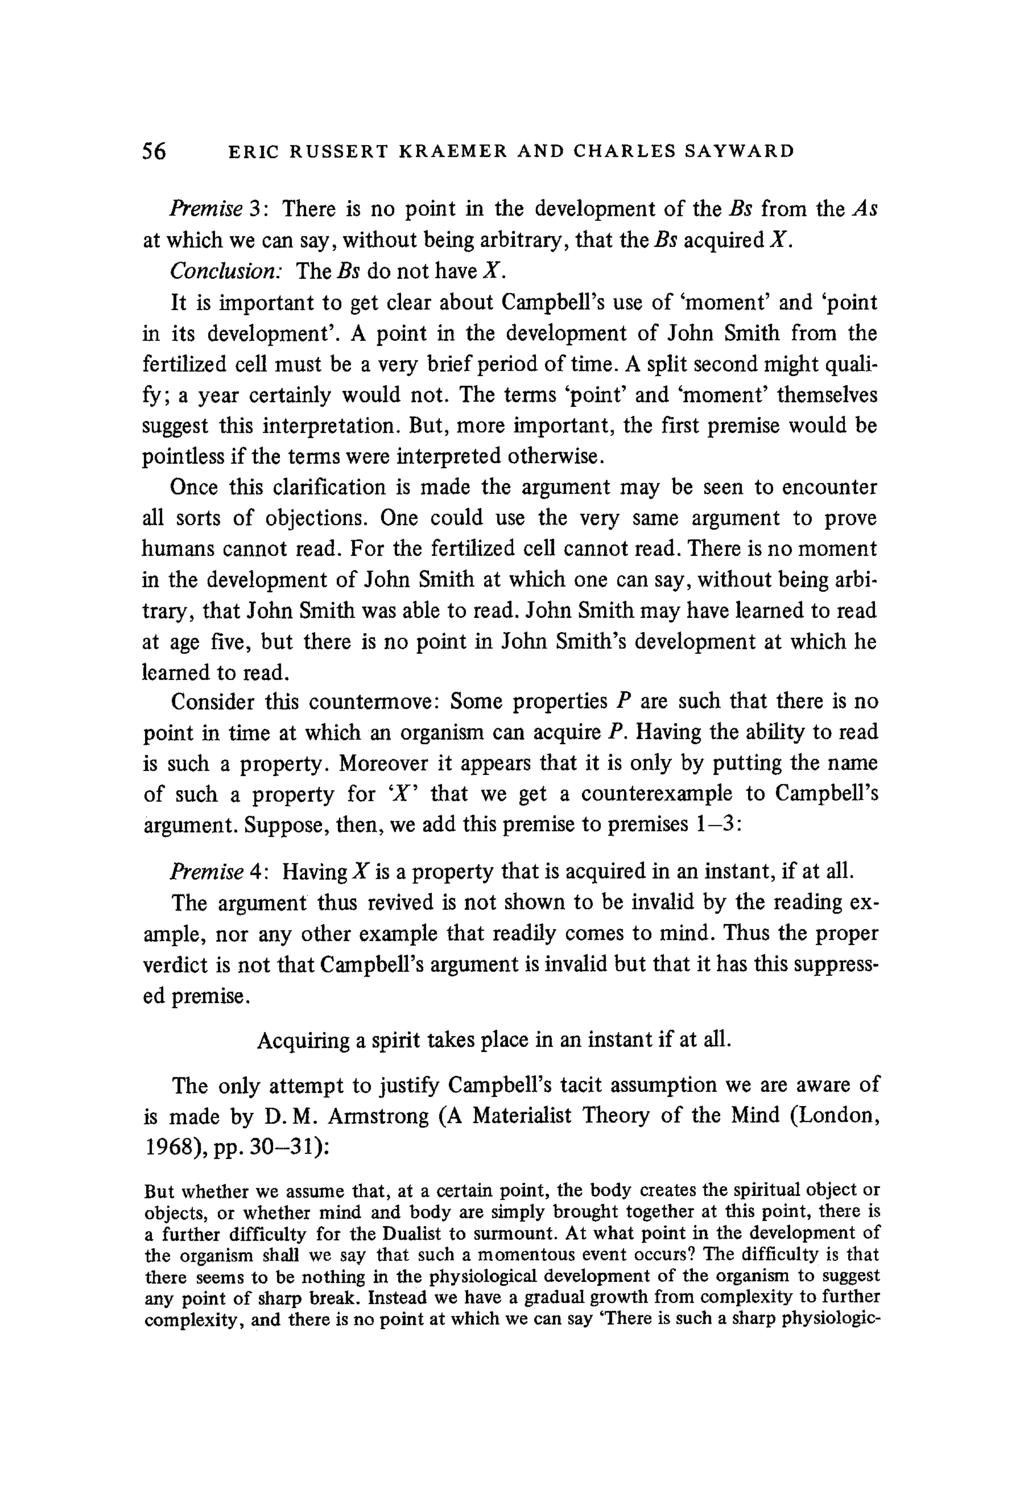 56 ERIC RUSSERT KRAEMER AND CHARLES SAYWARD Premise 3: There is no point in the development of the Bs from the As at which we can say, without being arbitrary, that the Bs acquired X.